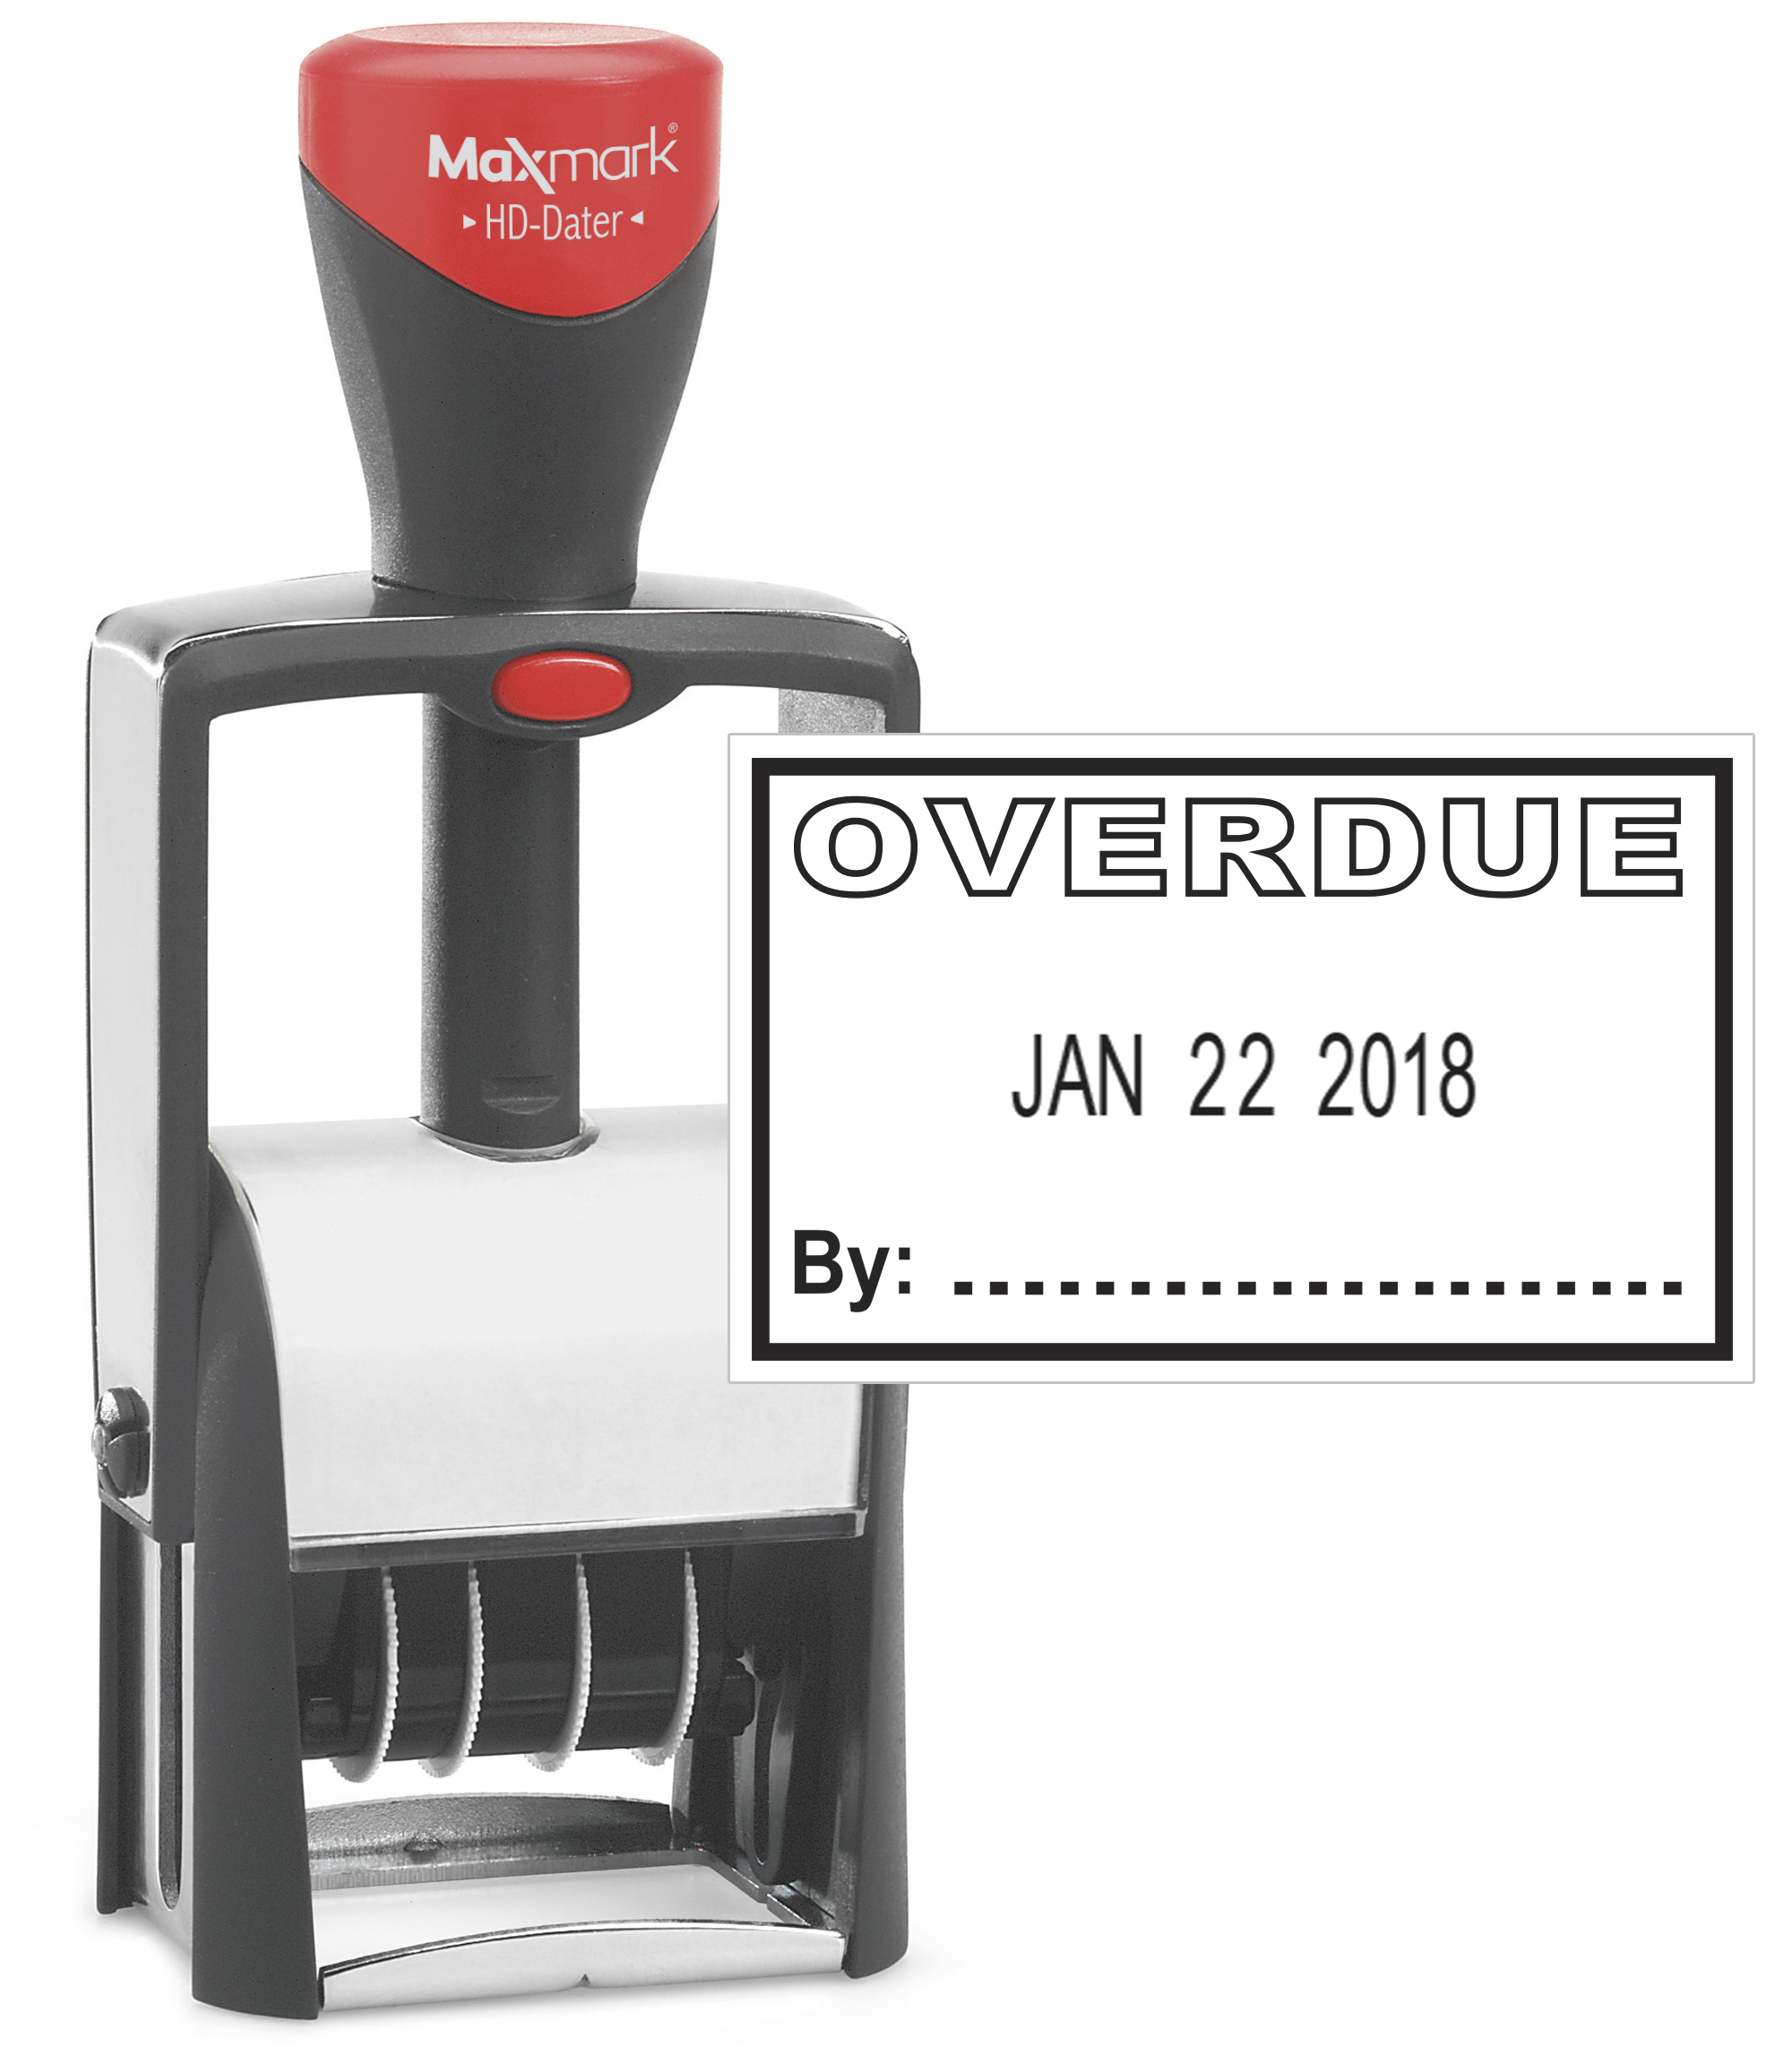 Heavy Duty Date Stamp with "OVERDUE" Self Inking Stamp - BLACK Ink